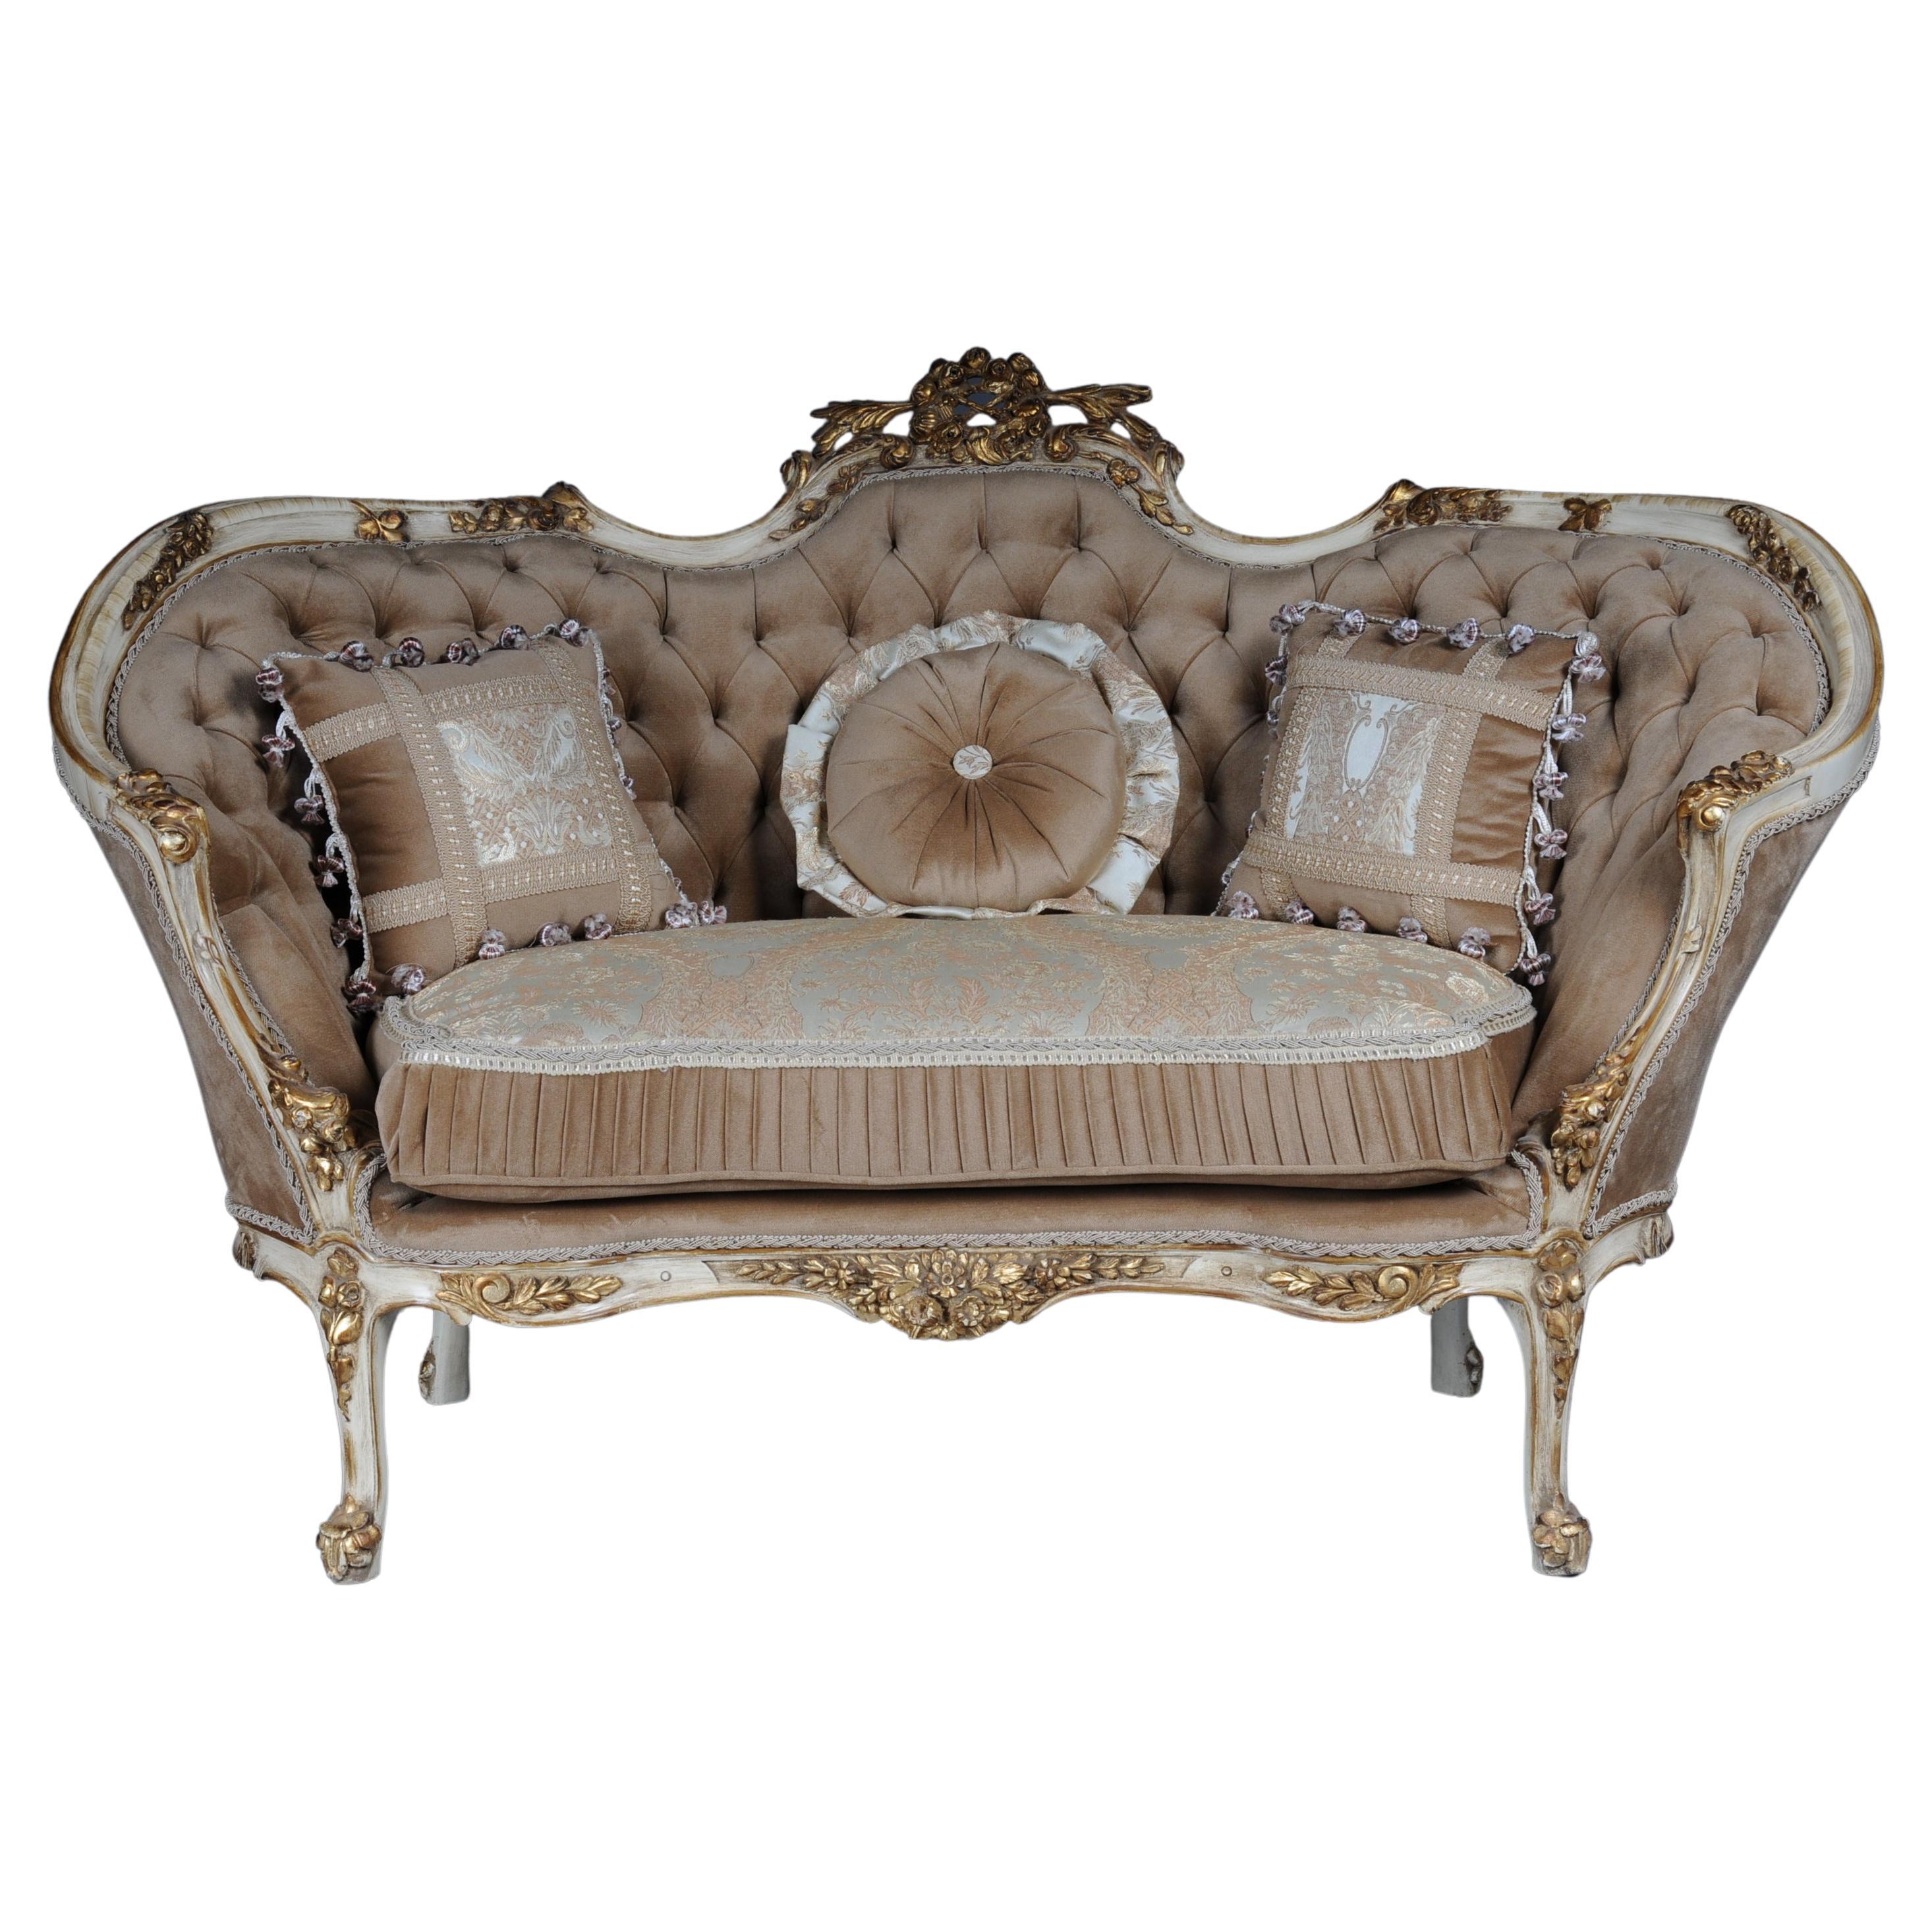 Elegant Sofa, Couch, Canapé in Rococo or Louis XV Style For Sale